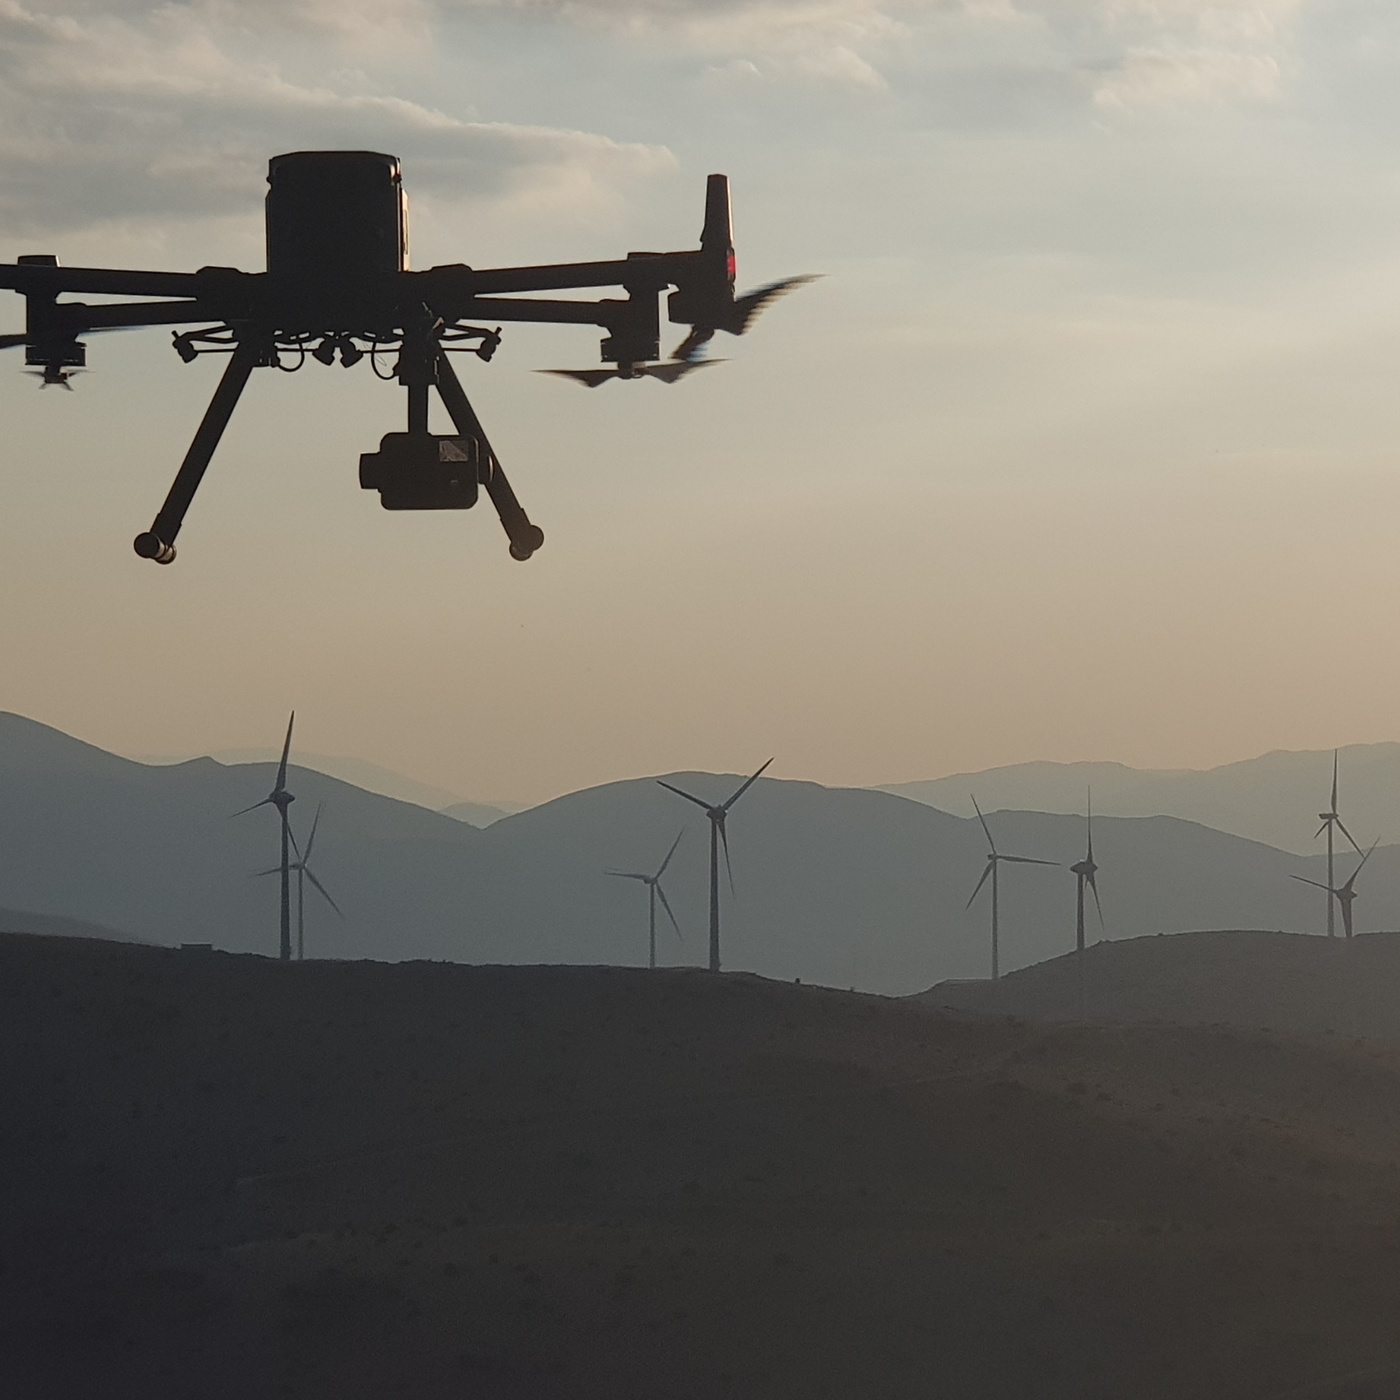 Drones for wind turbine inspection